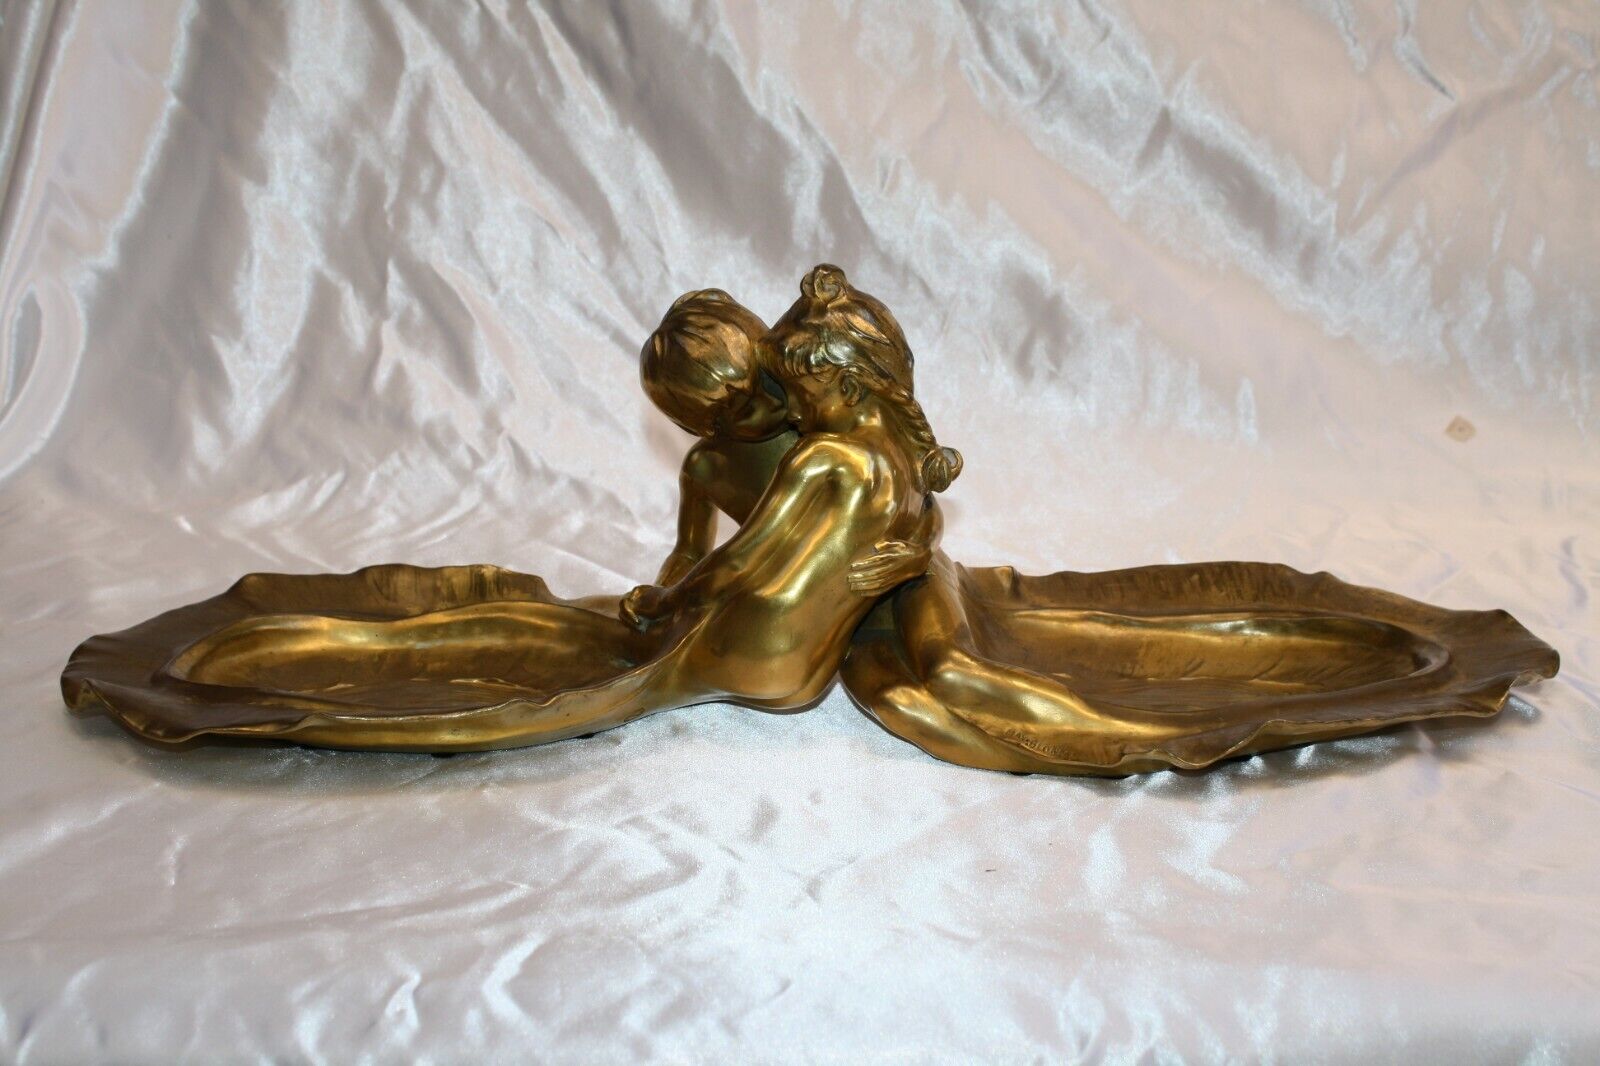 MAGNIFICENT 19C FRENCH GOLD PLATED BRONZE CENTER PIECE BY MAX BLONDAT LISTED ART